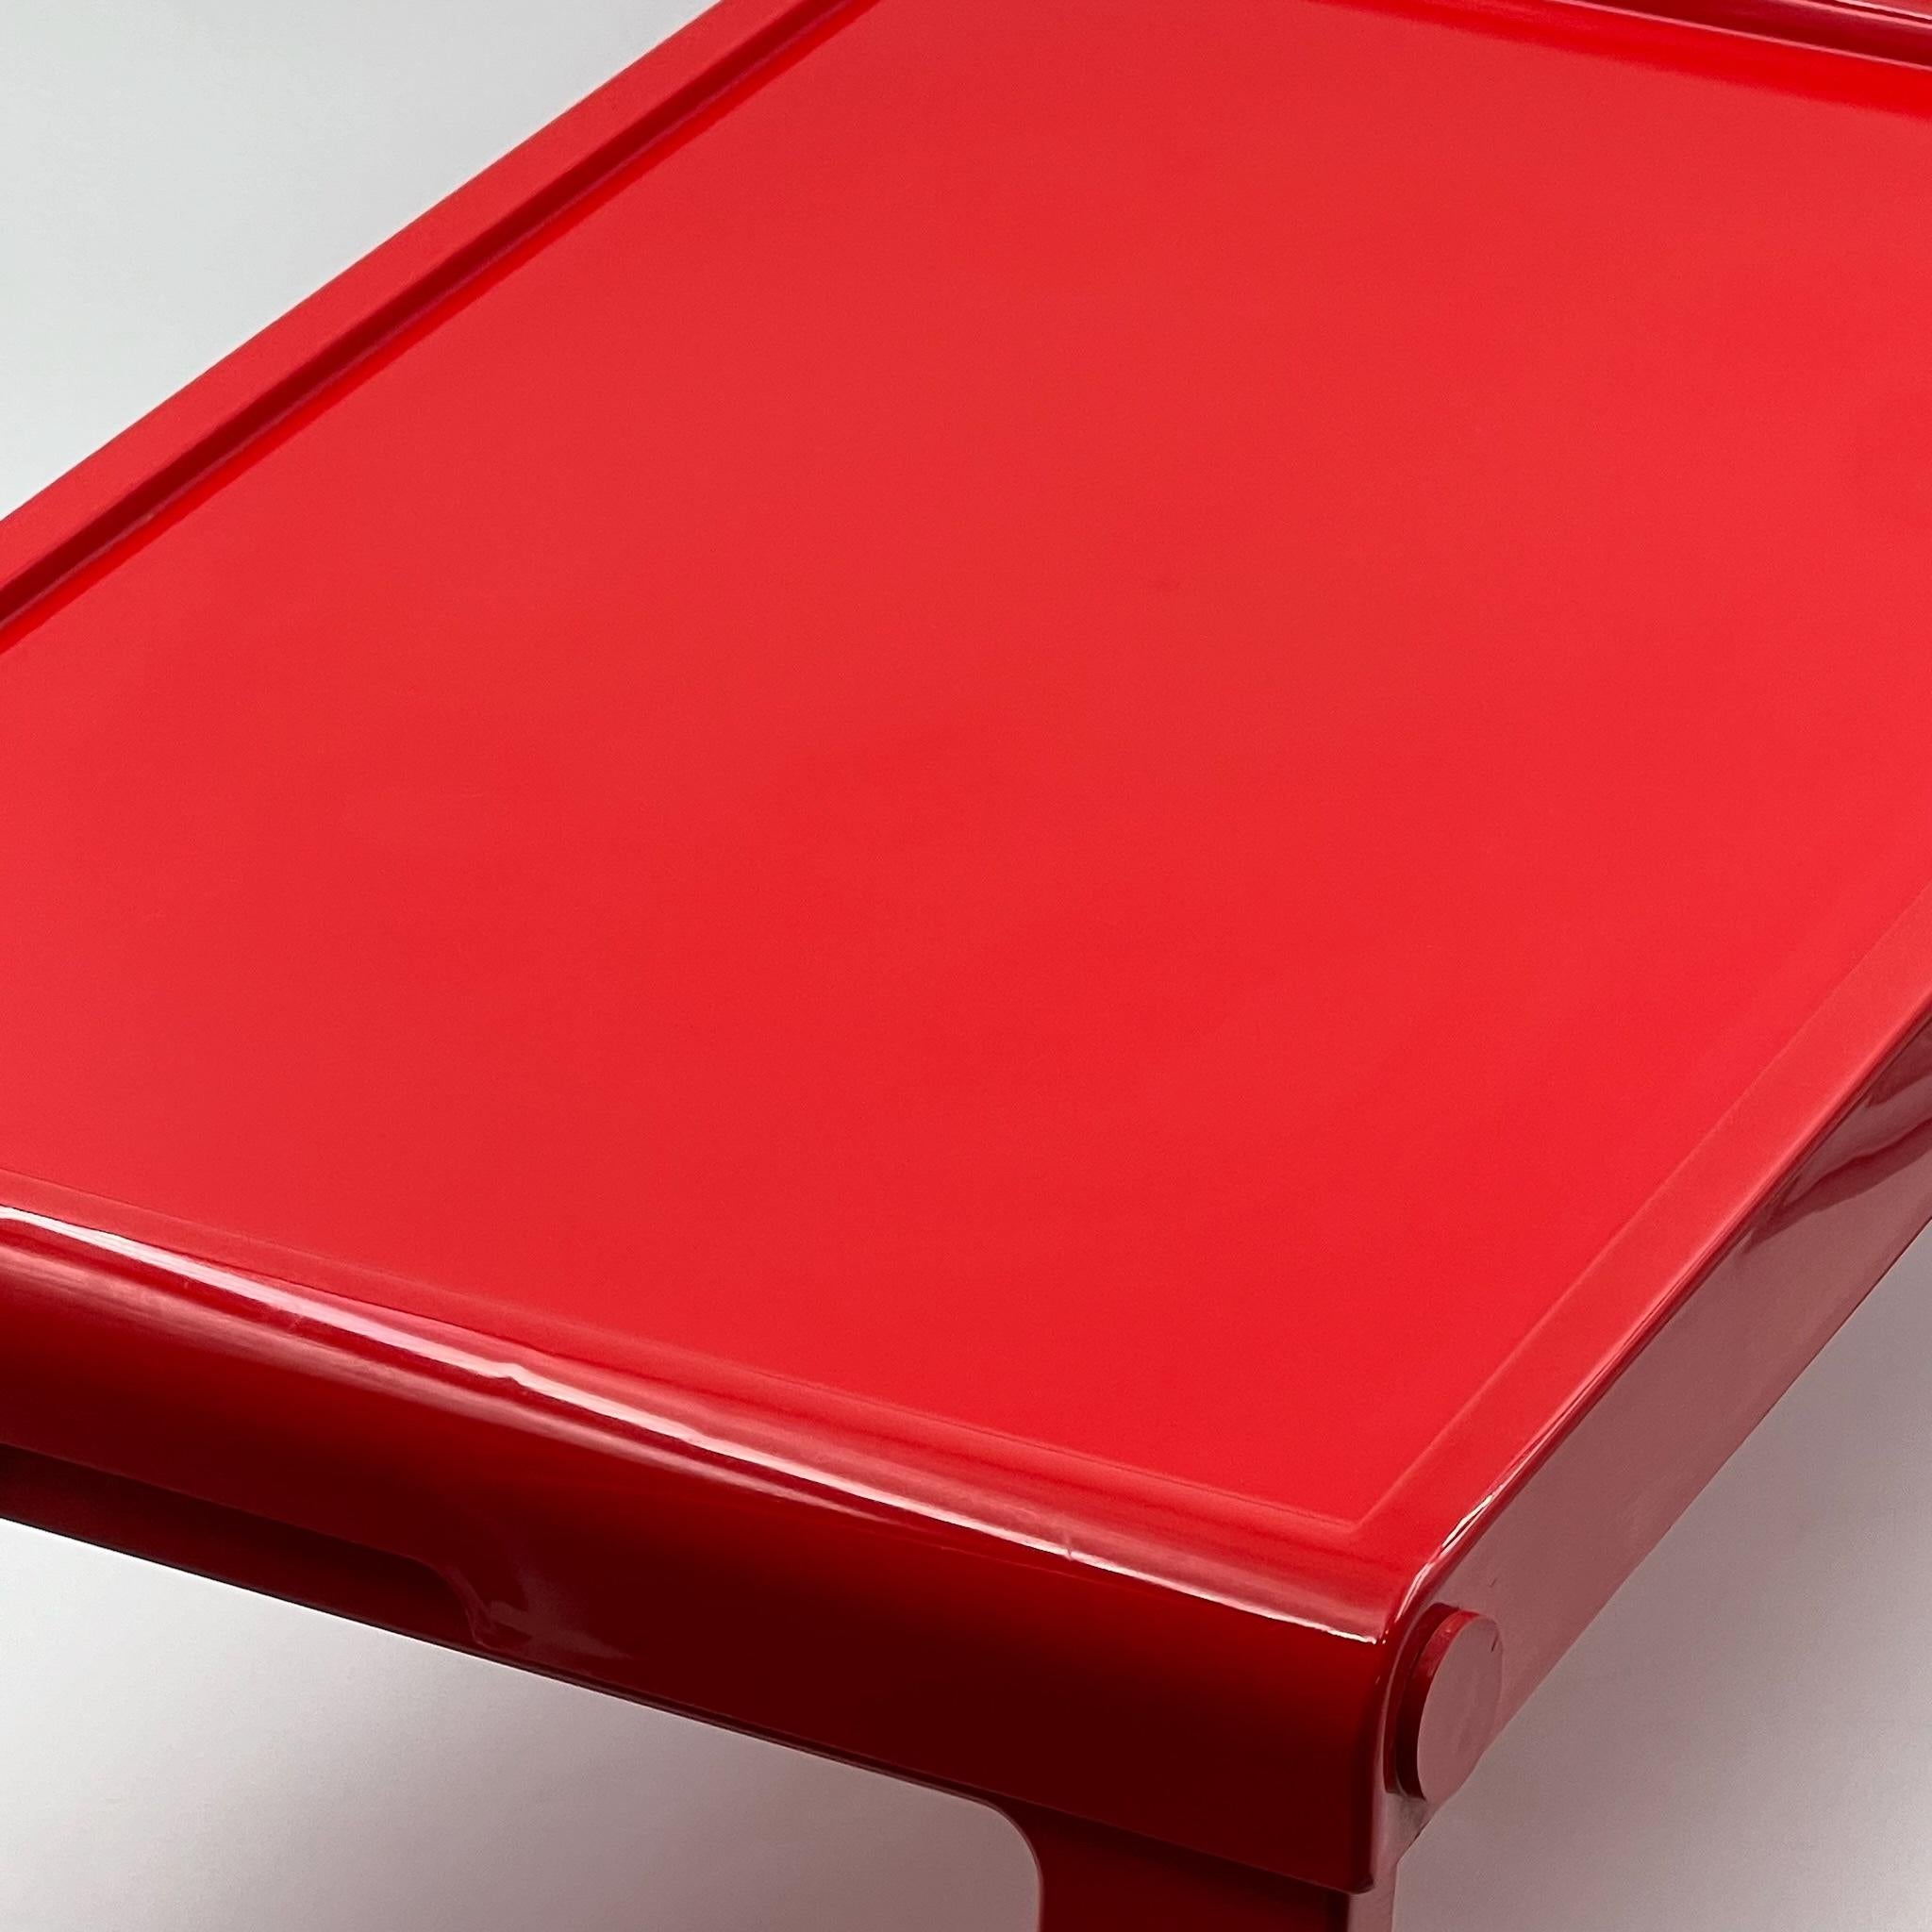 Plastic Iconic Tray Table 'Jolly' by Luigi Massoni for Guzzini in Glossy Red , 1970s